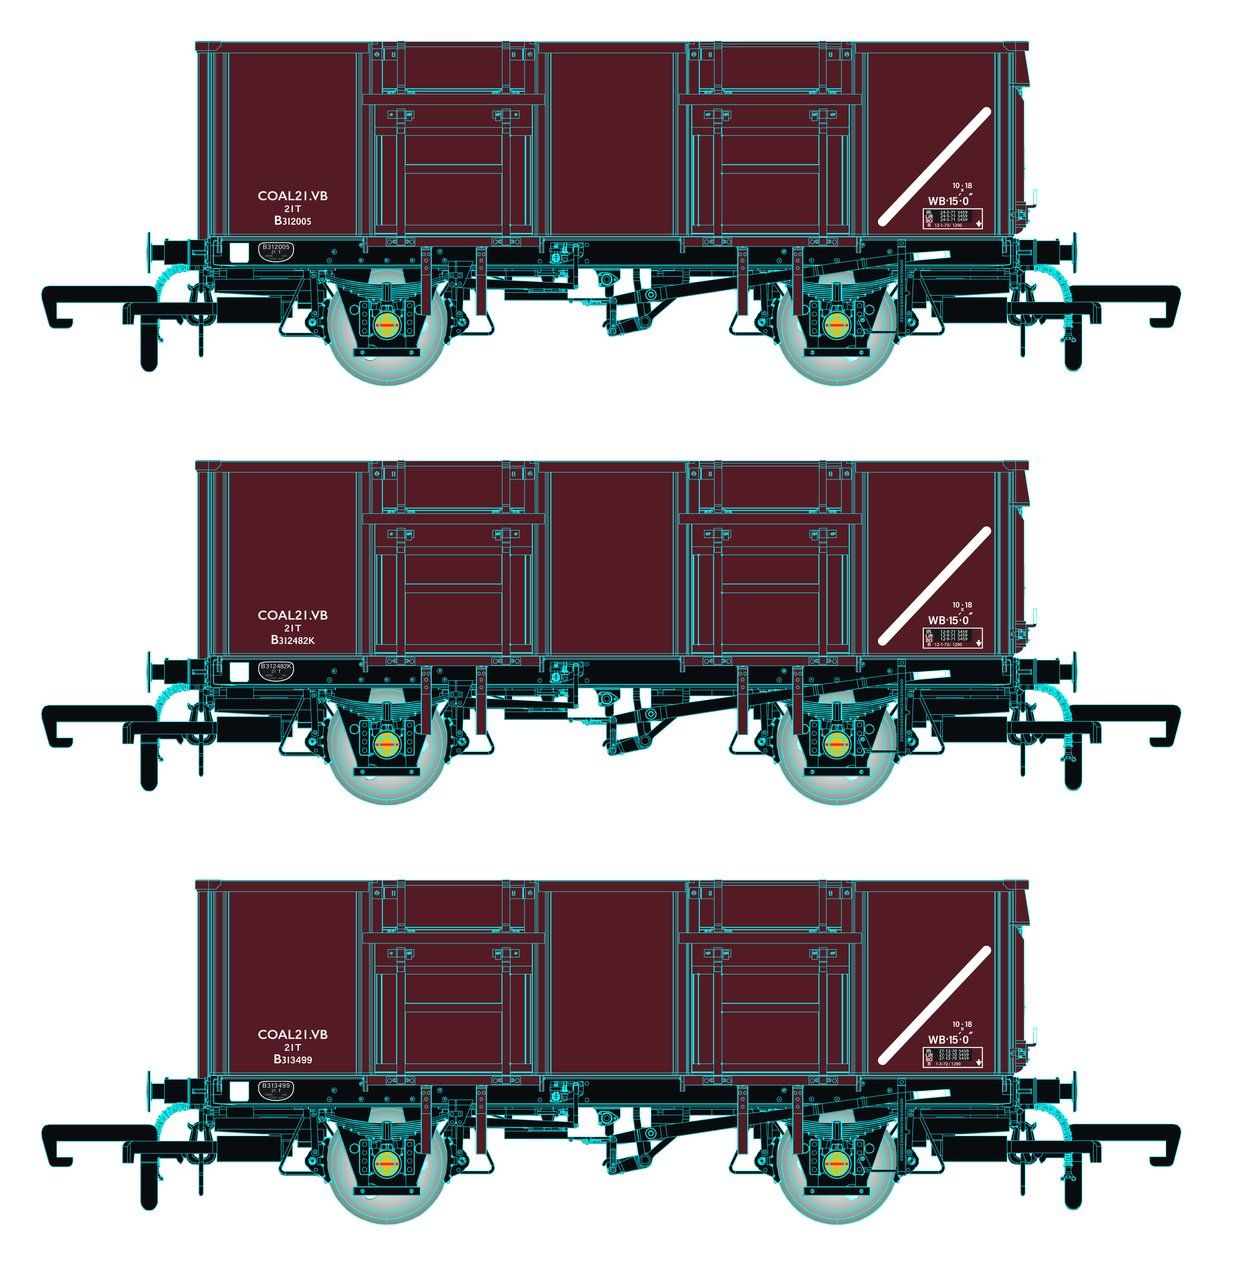 Accurascale ACC1092-MDVC BR 21T COAL21VB/MDV Mineral Wagon Triple Pack Bauxite TOPS Pack C